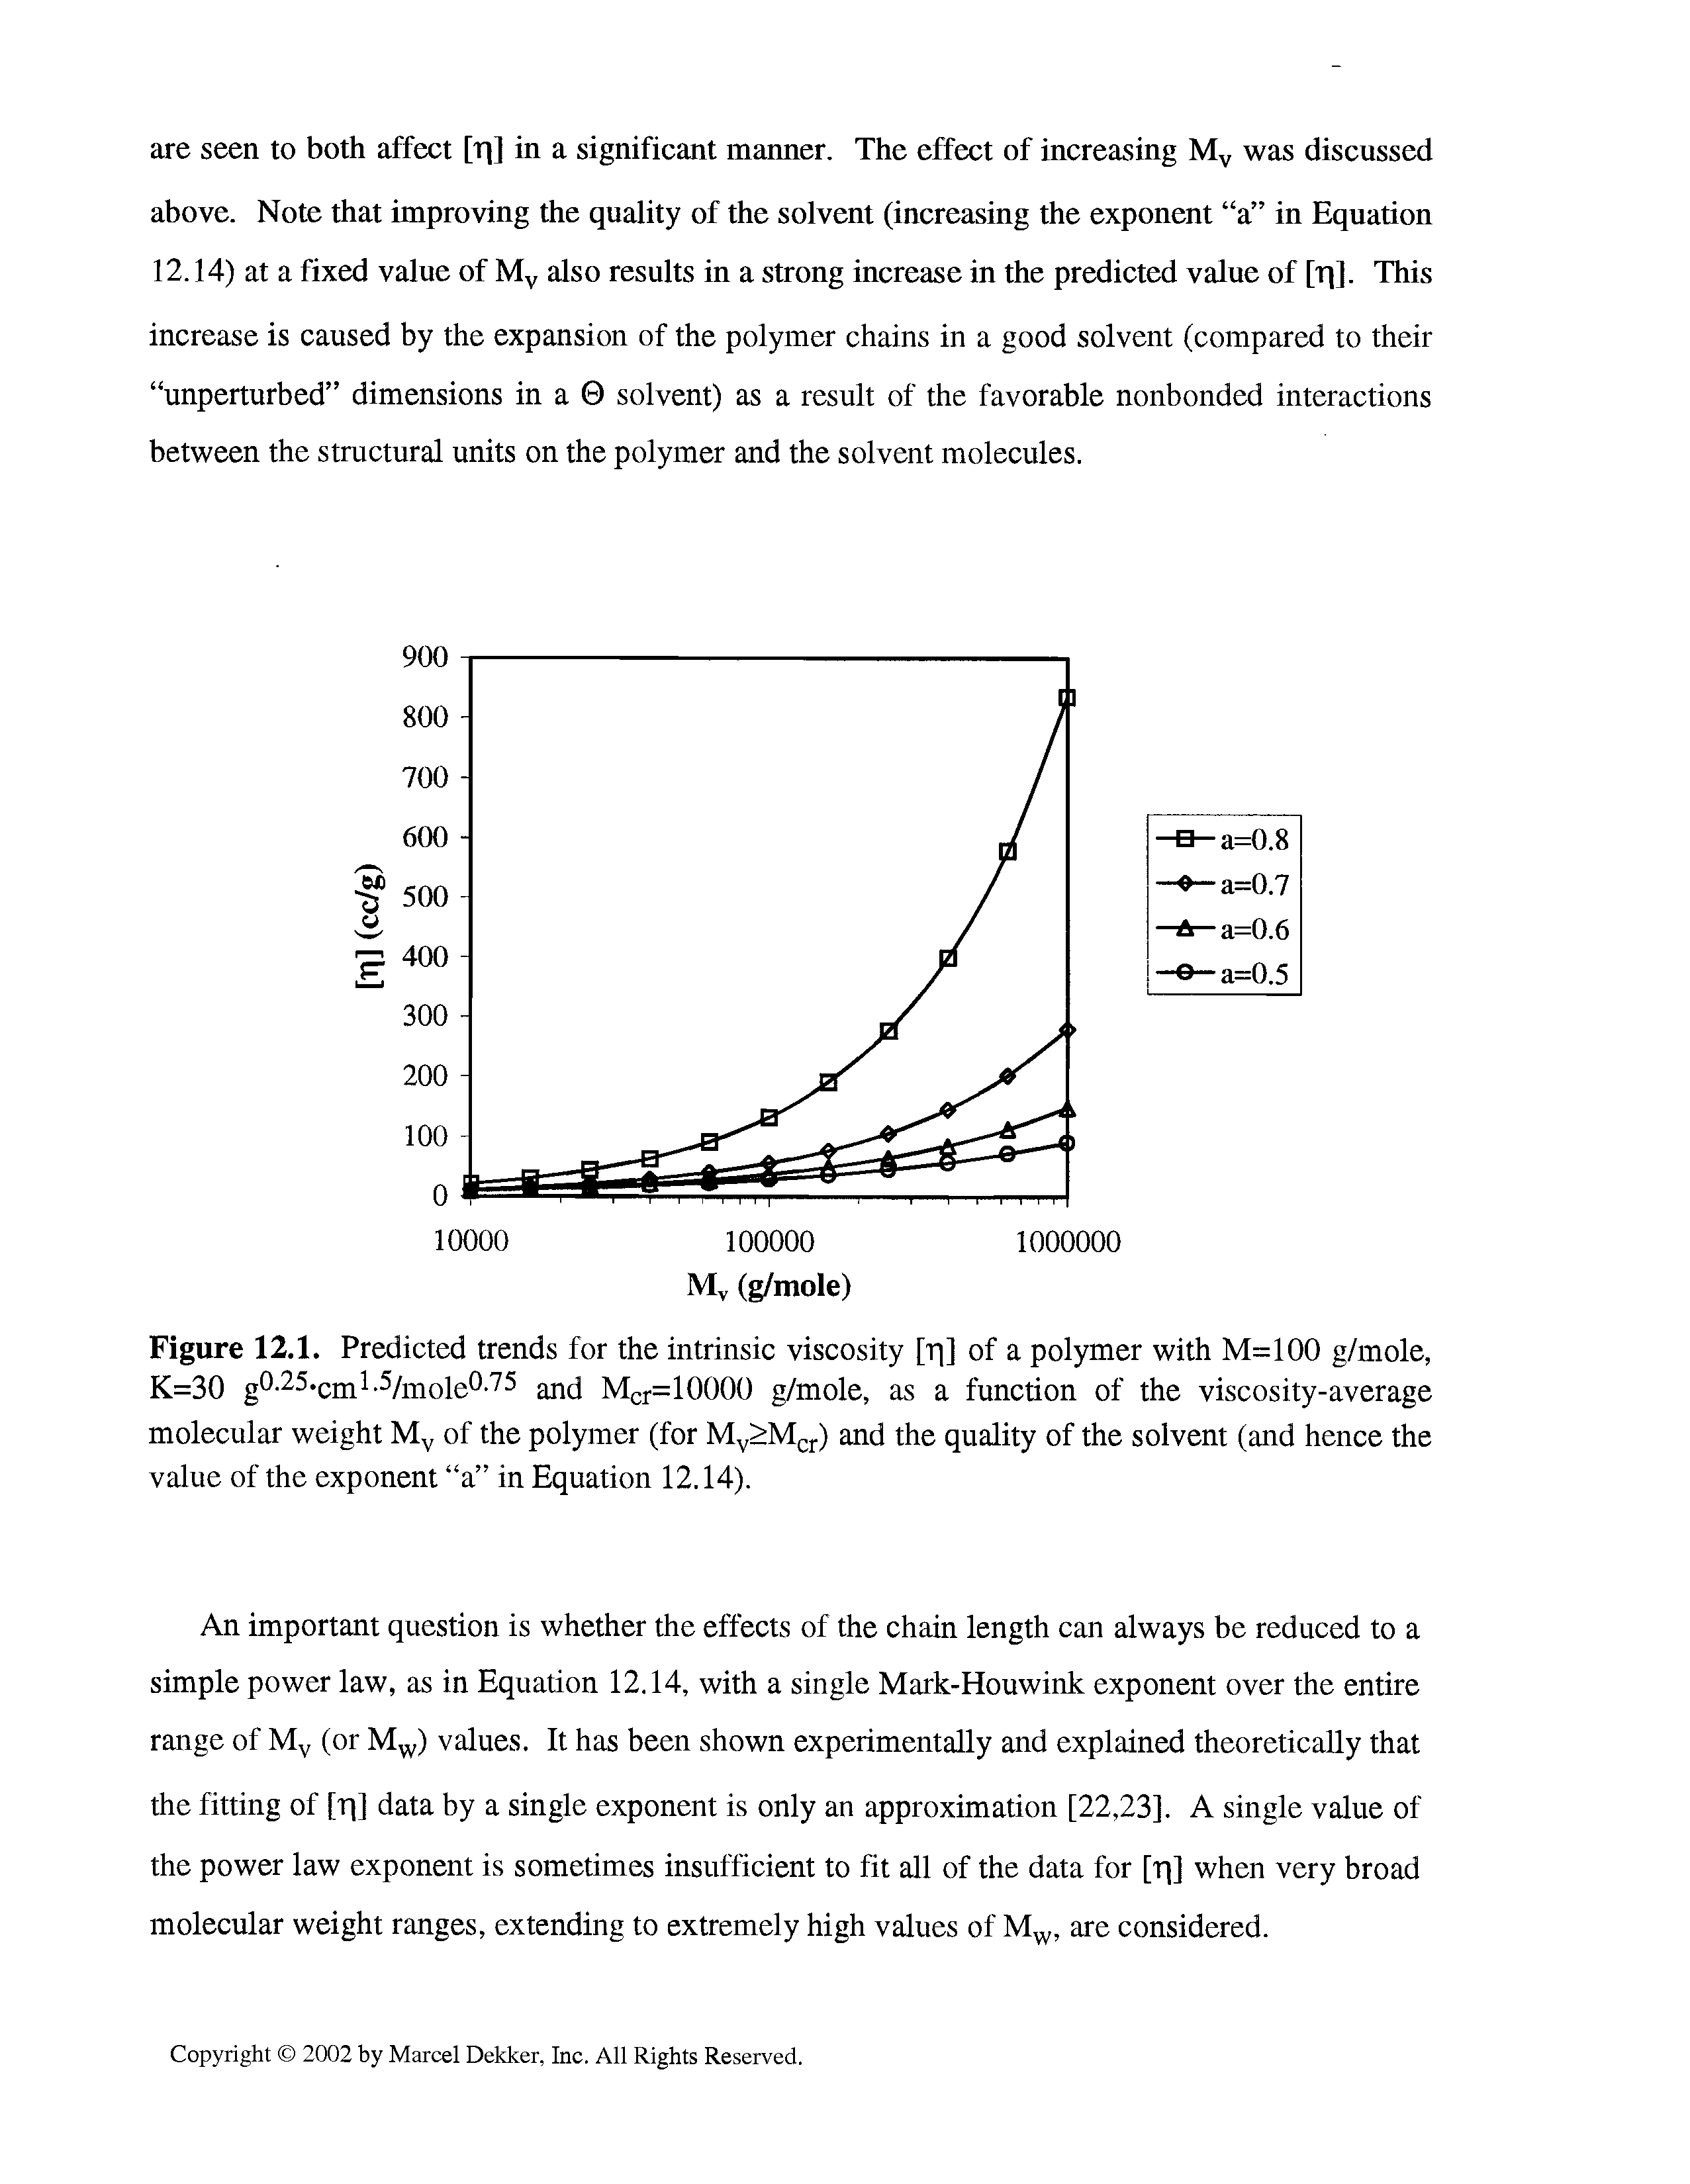 Figure 12.1. Predicted trends for the intrinsic viscosity [p] of a polymer with M=100 g/mole, K=30 g°-25,cm1-5/mole0-75 and Mcr=10000 g/mole, as a function of the viscosity-average molecular weight Mv of the polymer (for Mv>Mcr) and the quality of the solvent (and hence the value of the exponent a in Equation 12.14).